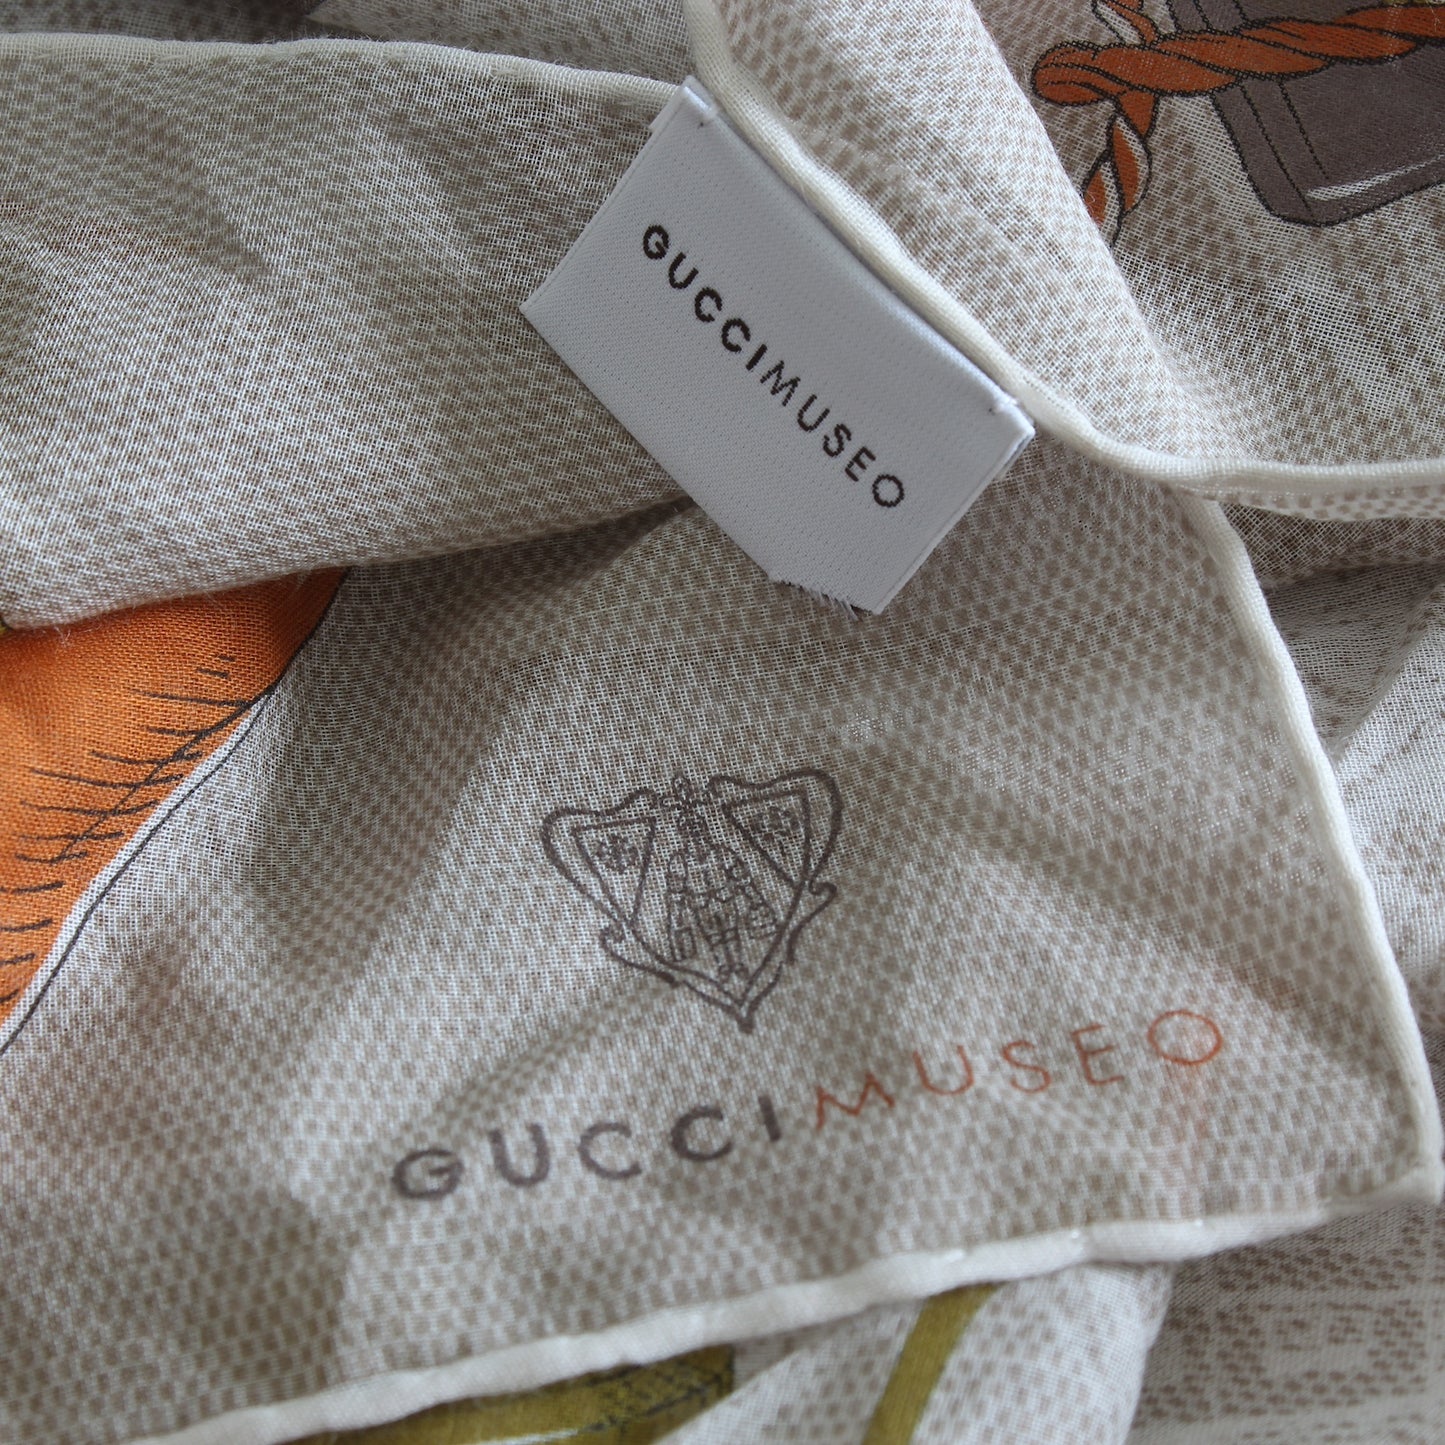 Gucci Museo Cotton Beige Scarf 2011s Limited Edition